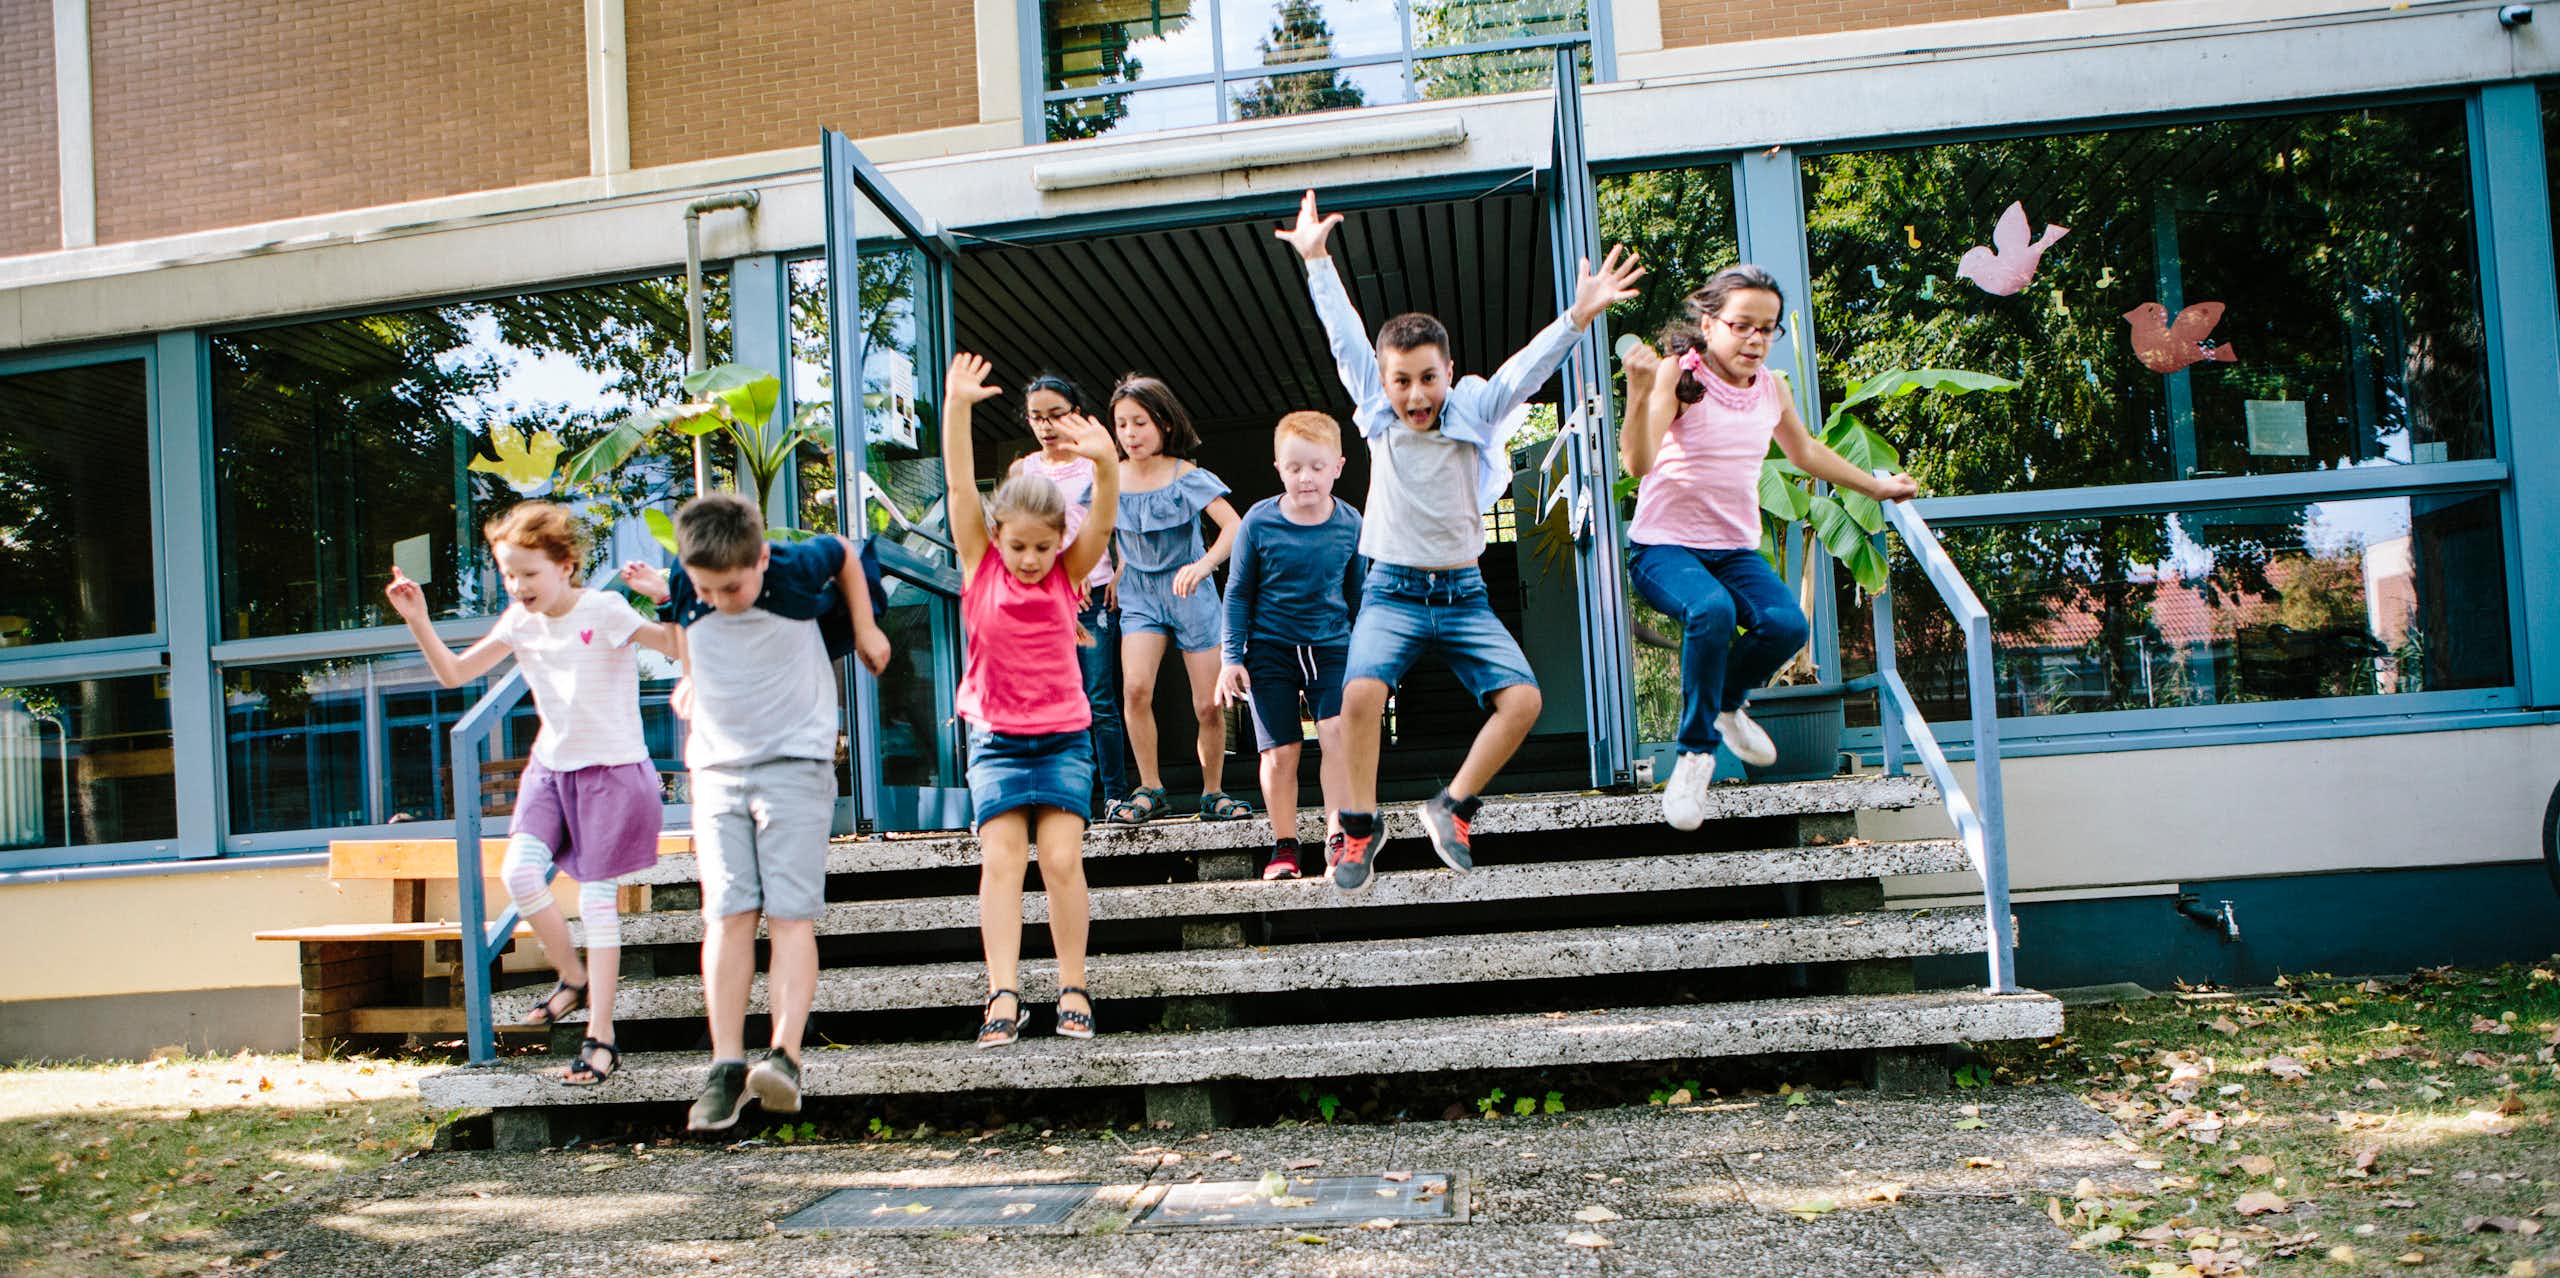 Health and education are closely linked – NZ needs to integrate them more in primary schools